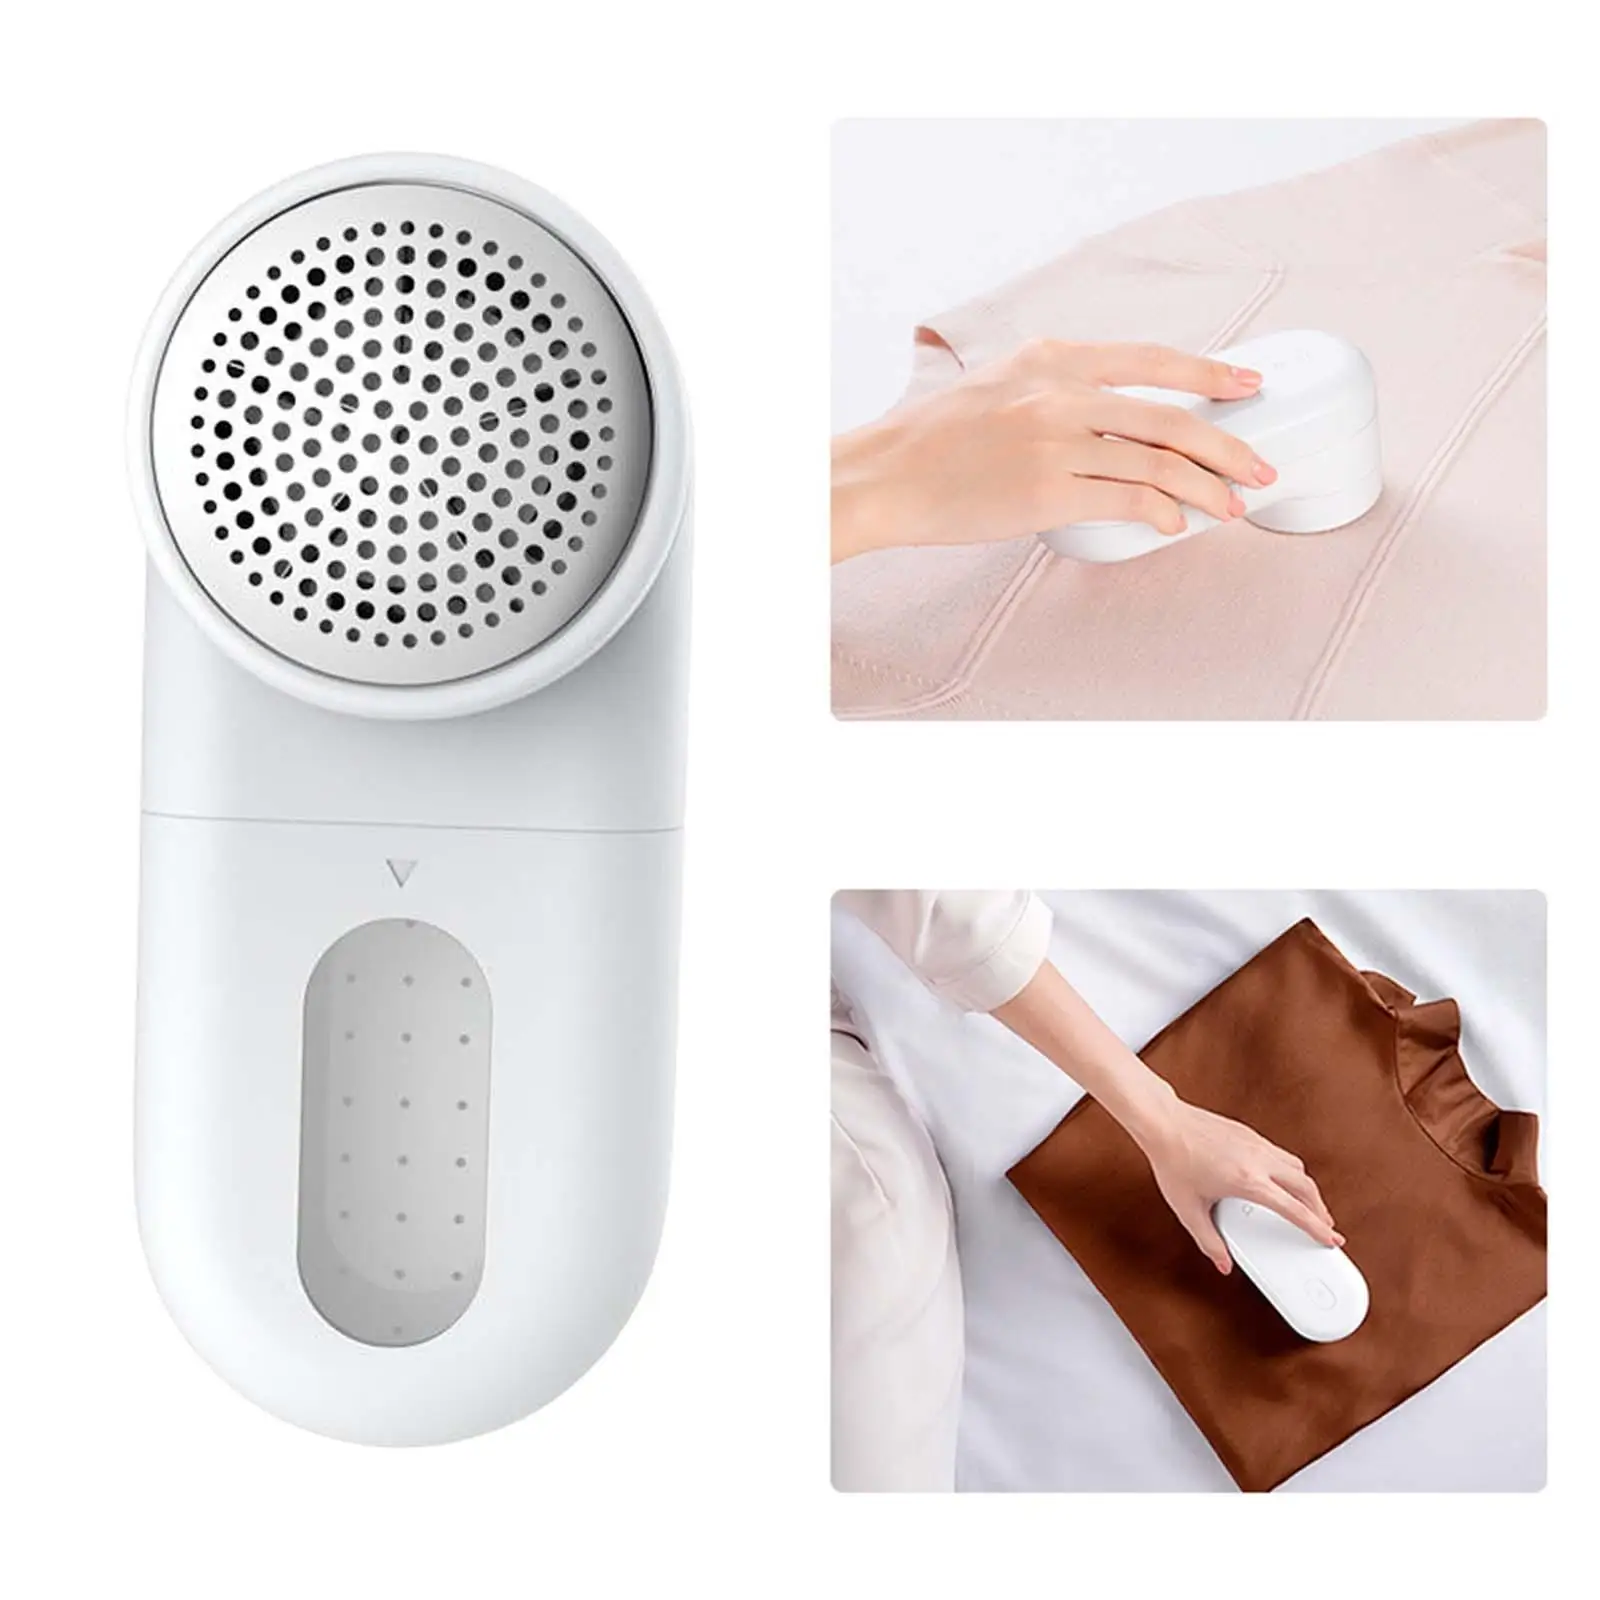 Lint Remover USB Rechargeable 5 Leaf Blades Pet Hair Pilling Remover Tool Clothes Fuzz Remover Bedding Wool Socks Flannel